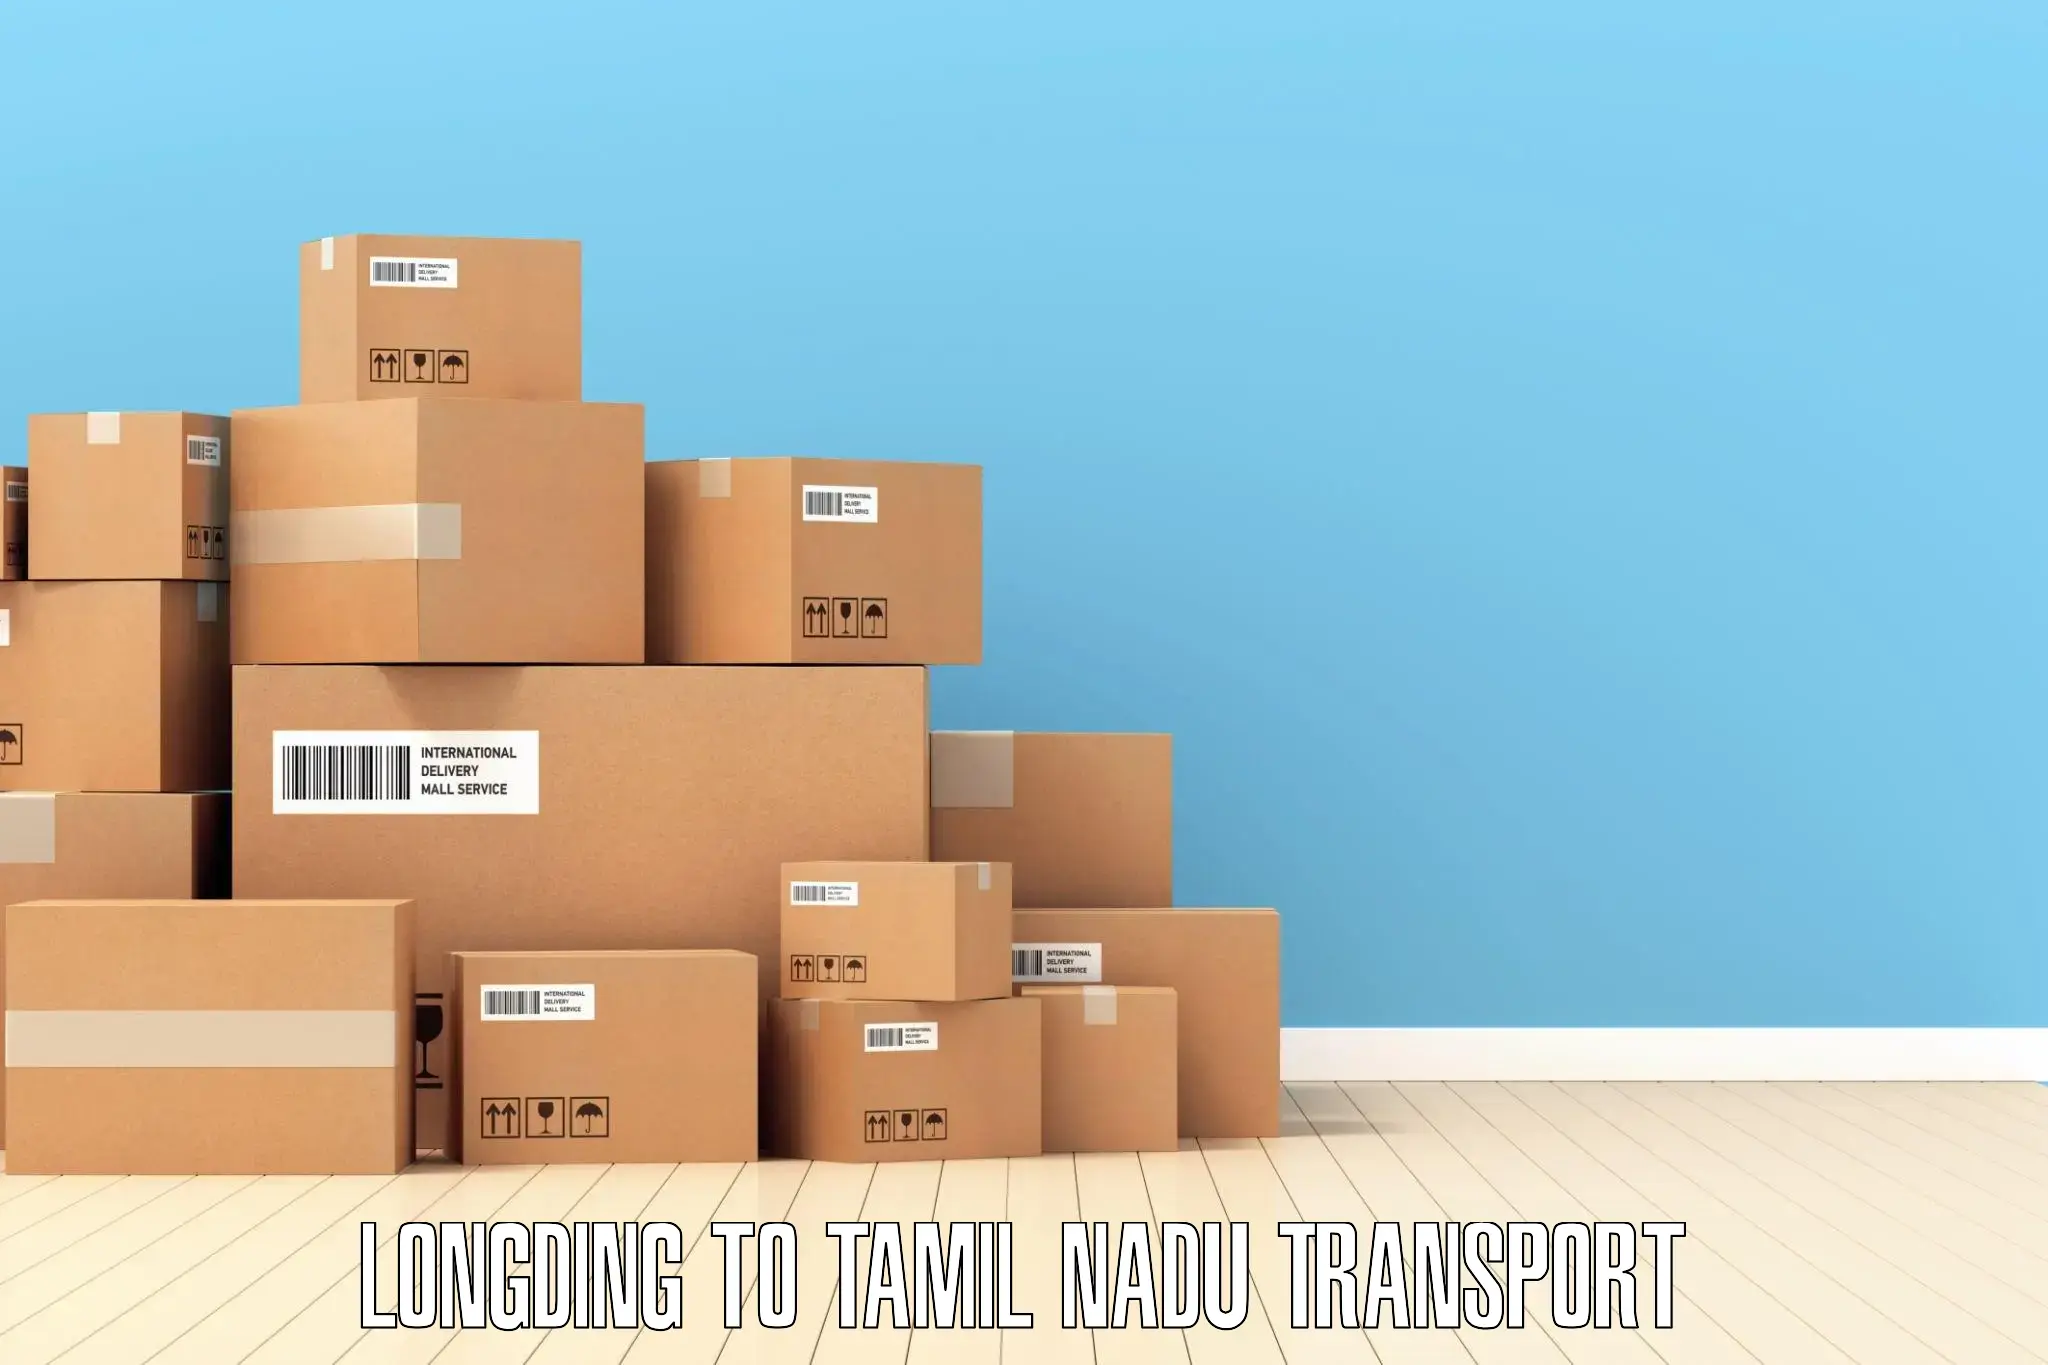 Door to door transport services Longding to Ennore Port Chennai